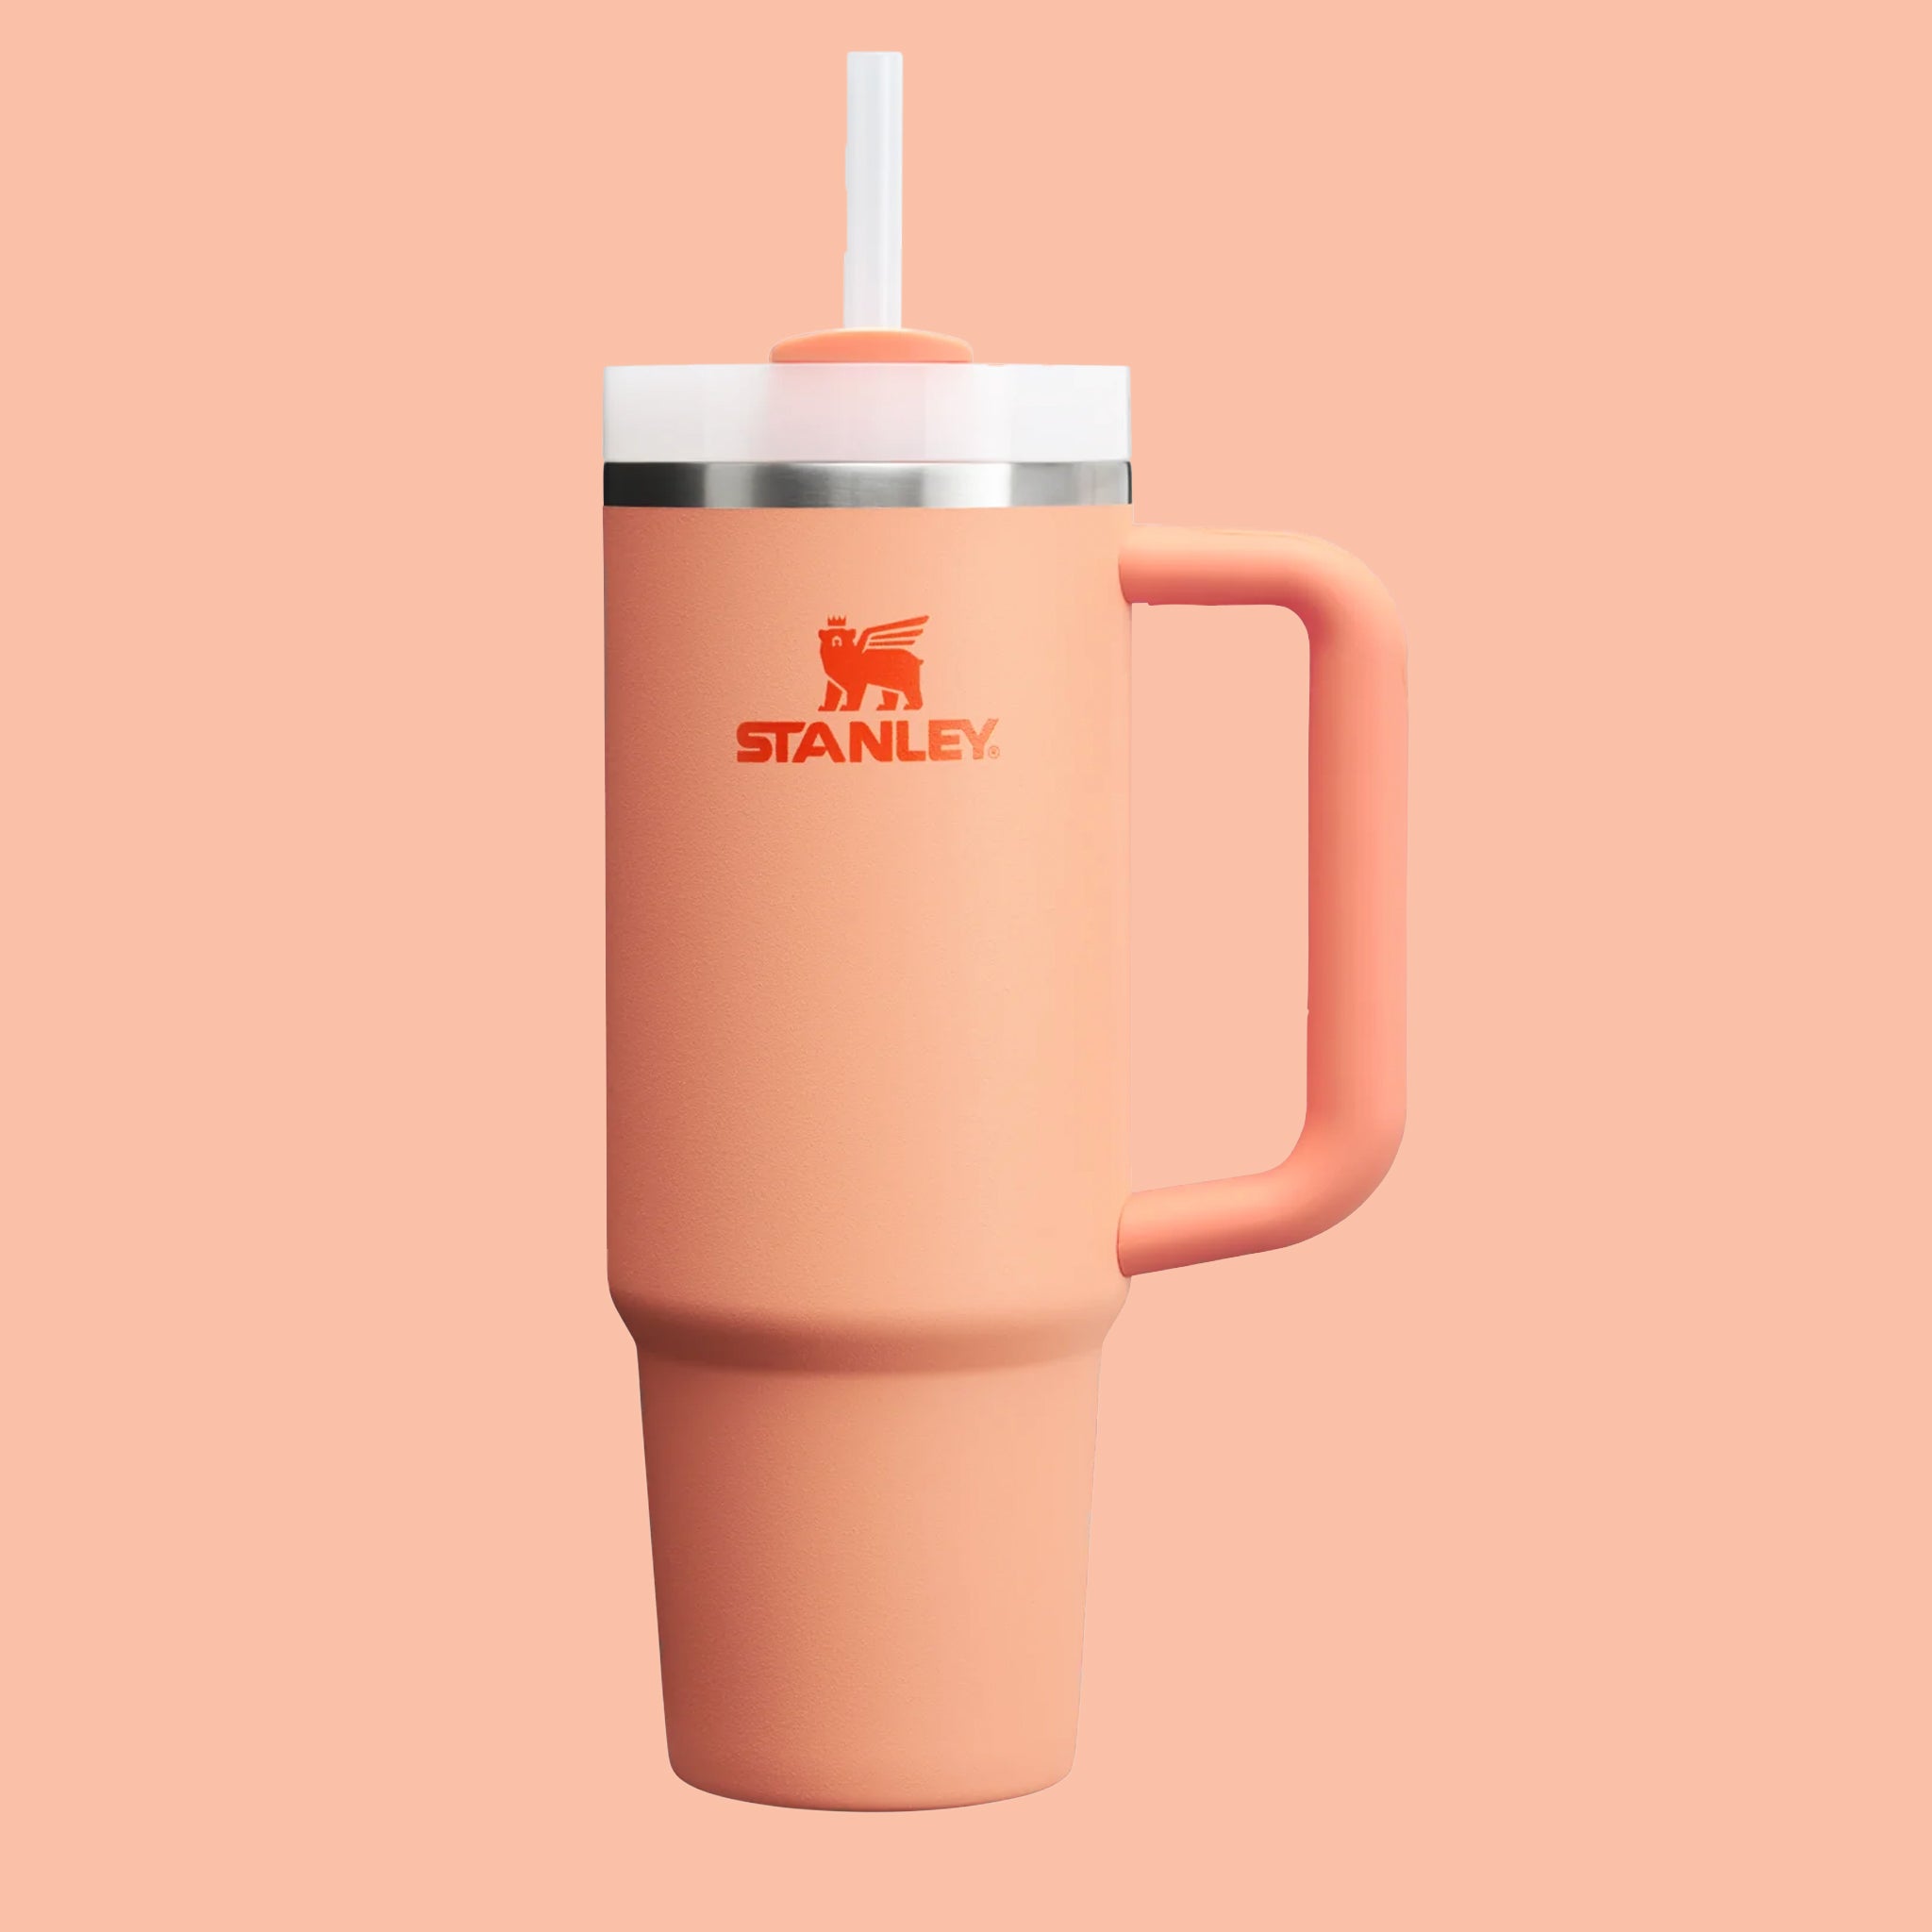 On a salmon pink background is a nectarine orange colored water bottle and straw. 